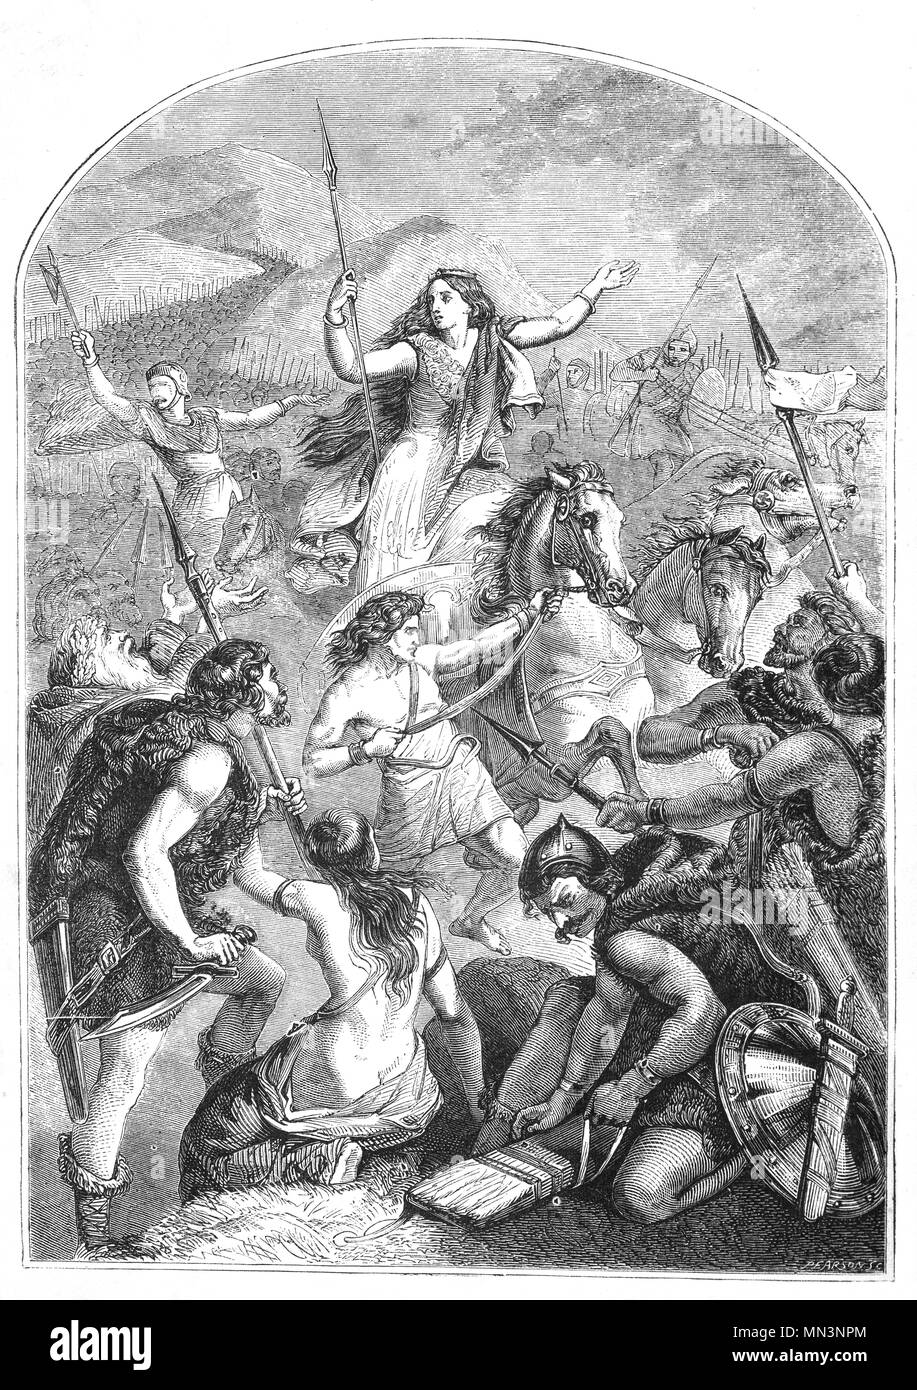 Boudica aka Boadicea or Boudicea was a queen of the British Celtic Iceni tribe who led an uprising against the occupying forces of the Roman Empire.  In AD 60 or 61, when the Roman governor Gaius Suetonius Paulinus was campaigning on the island of Anglesey off the northwest coast of Wales, Boudica led theCelts in revolt. They destroyed Camulodunum (modern Colchester) and went on to destroy Londinium and Verulamium (modern-day St Albans).  Suetonius, regrouped his forces in the West Midlands, and, despite being heavily outnumbered, defeated the Britons in the Battle of Watling Street. Stock Photo